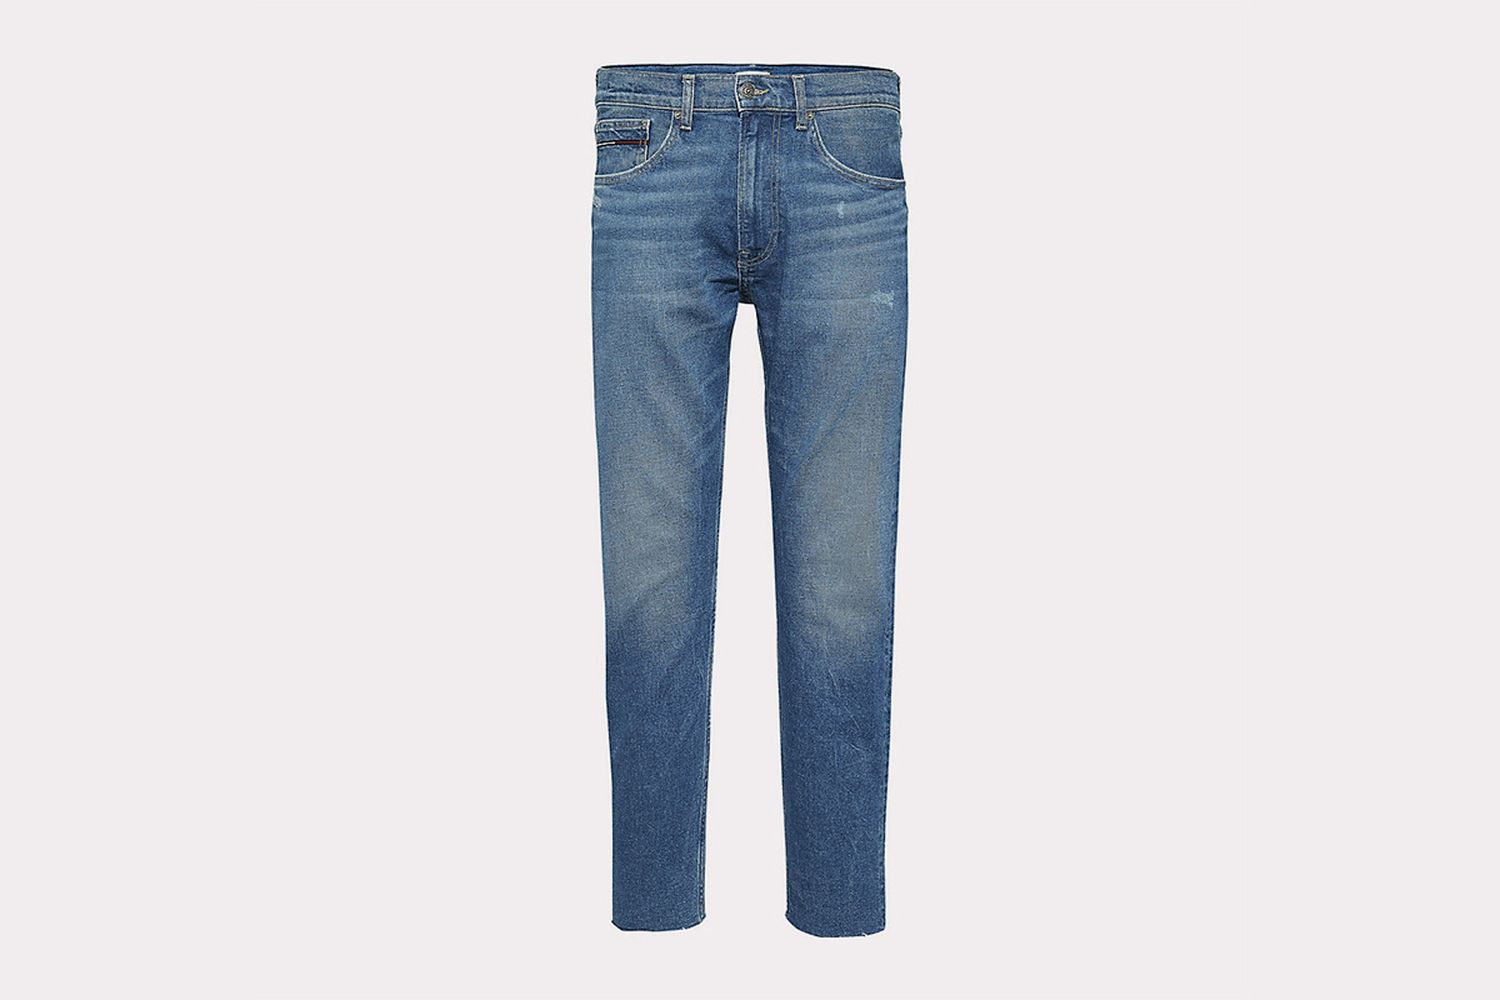 TJ 1988 Tapered Fit Jeans